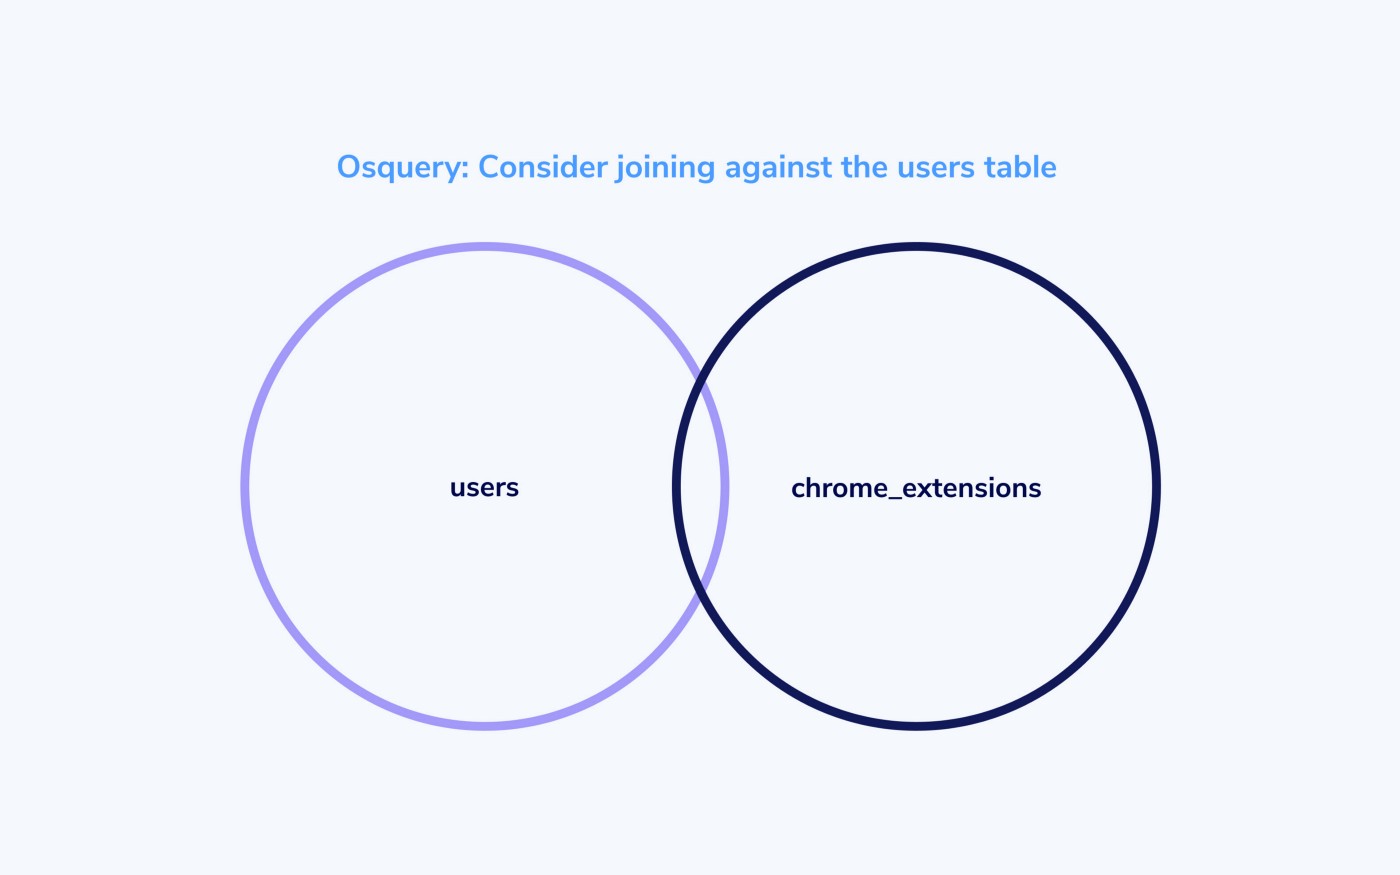 Osquery: Consider joining against the users table